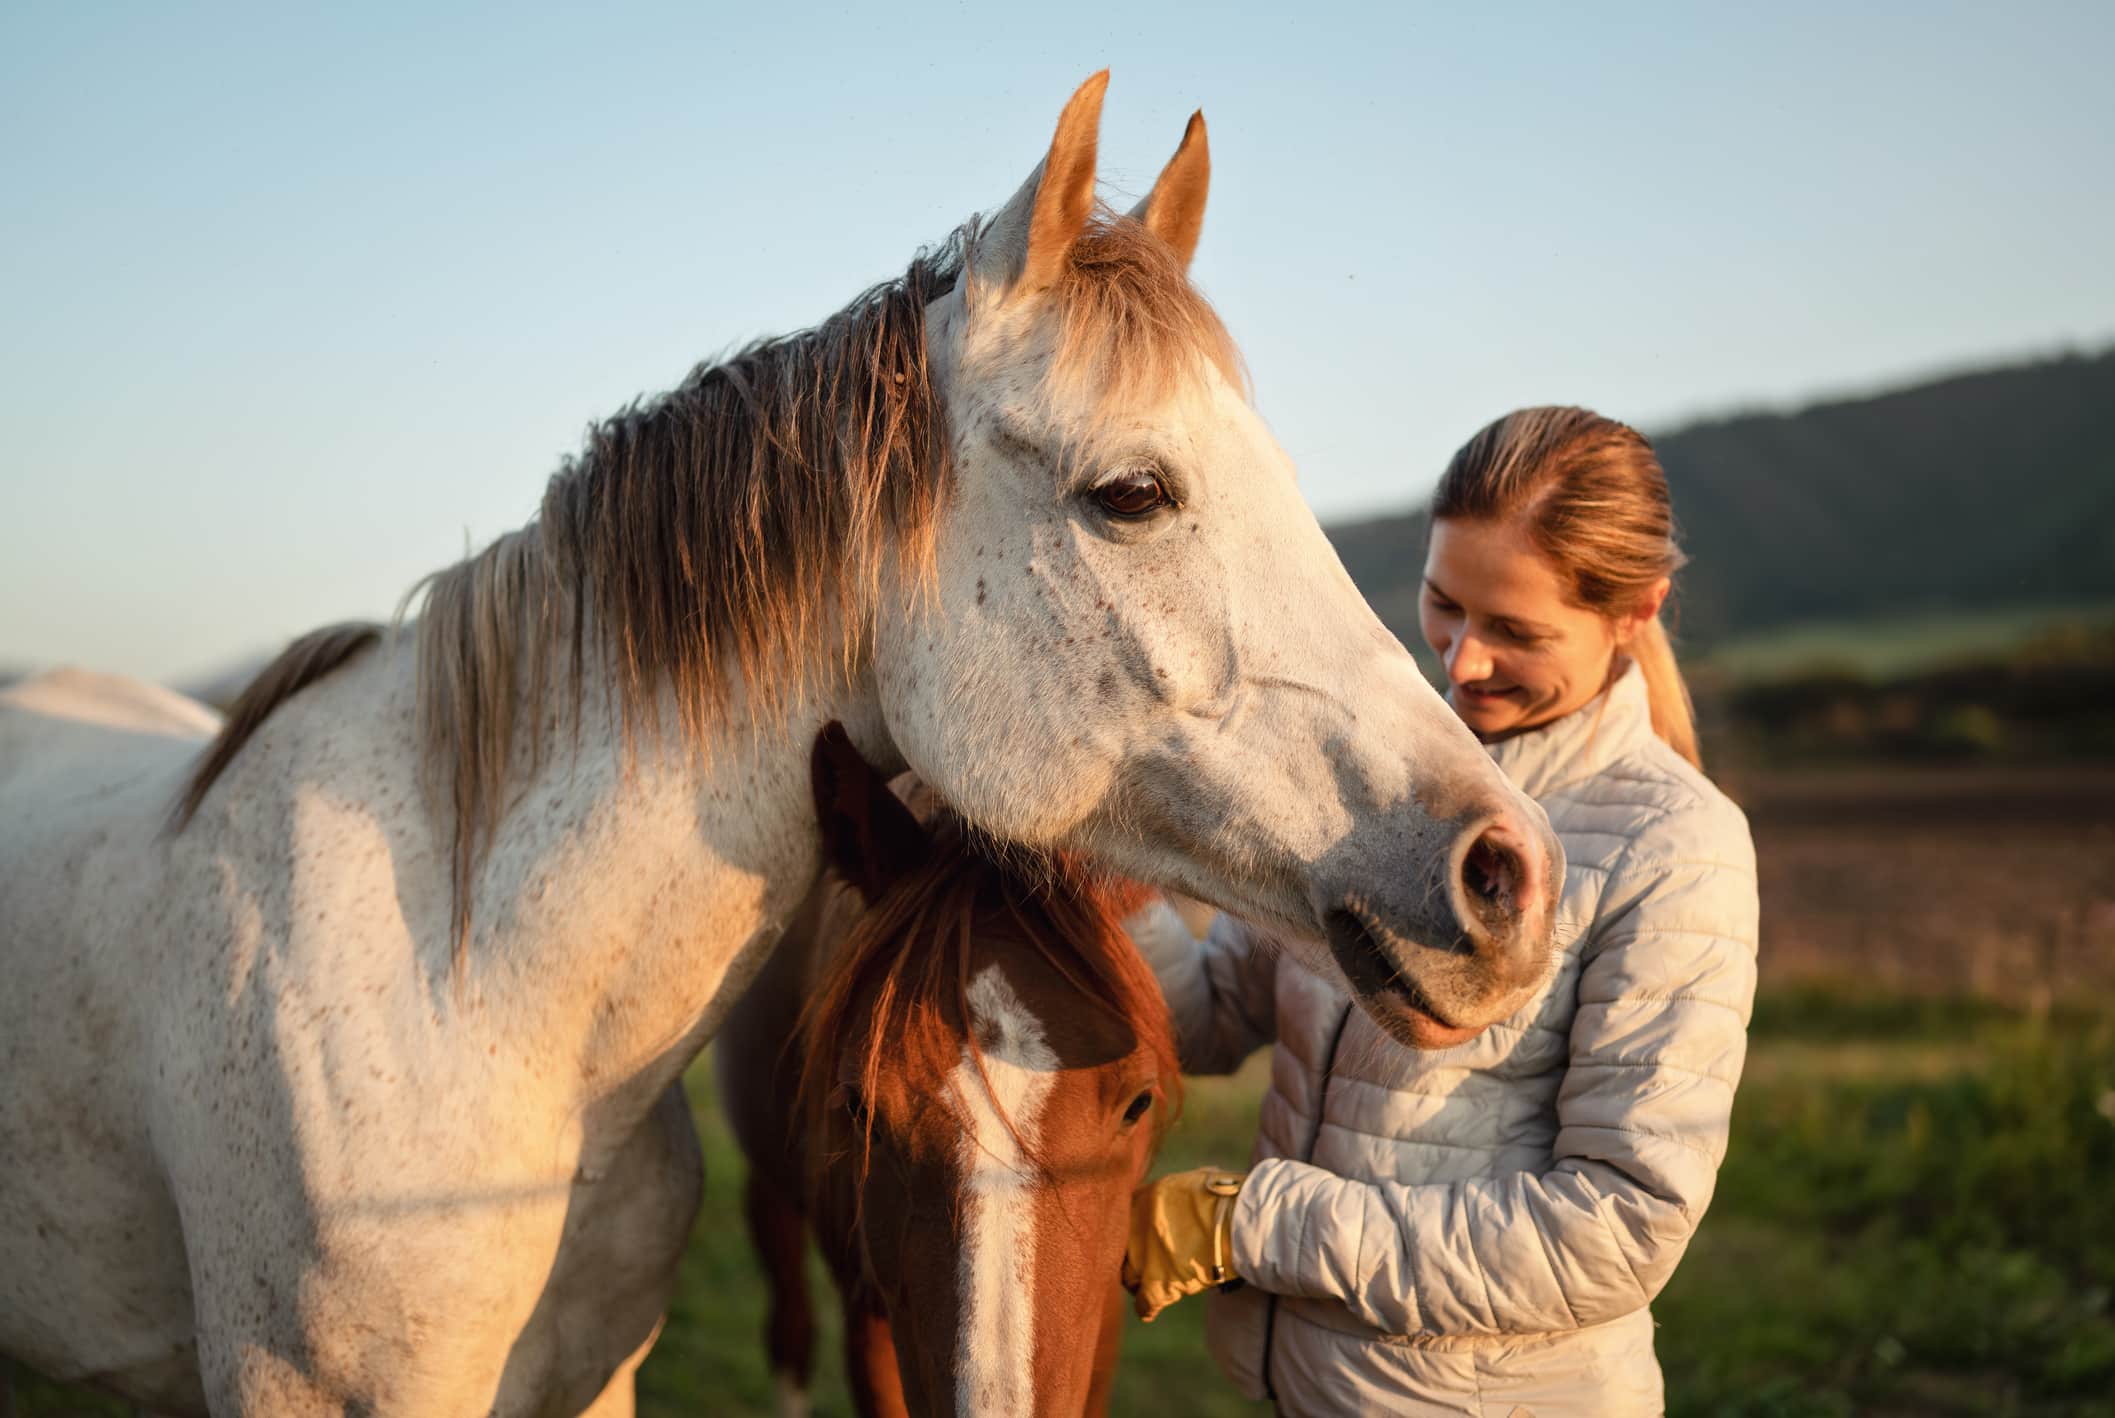 White Arabian horse, autumn afternoon, detail on head, blurred smiling young woman in warm jacket petting another brown animal behind